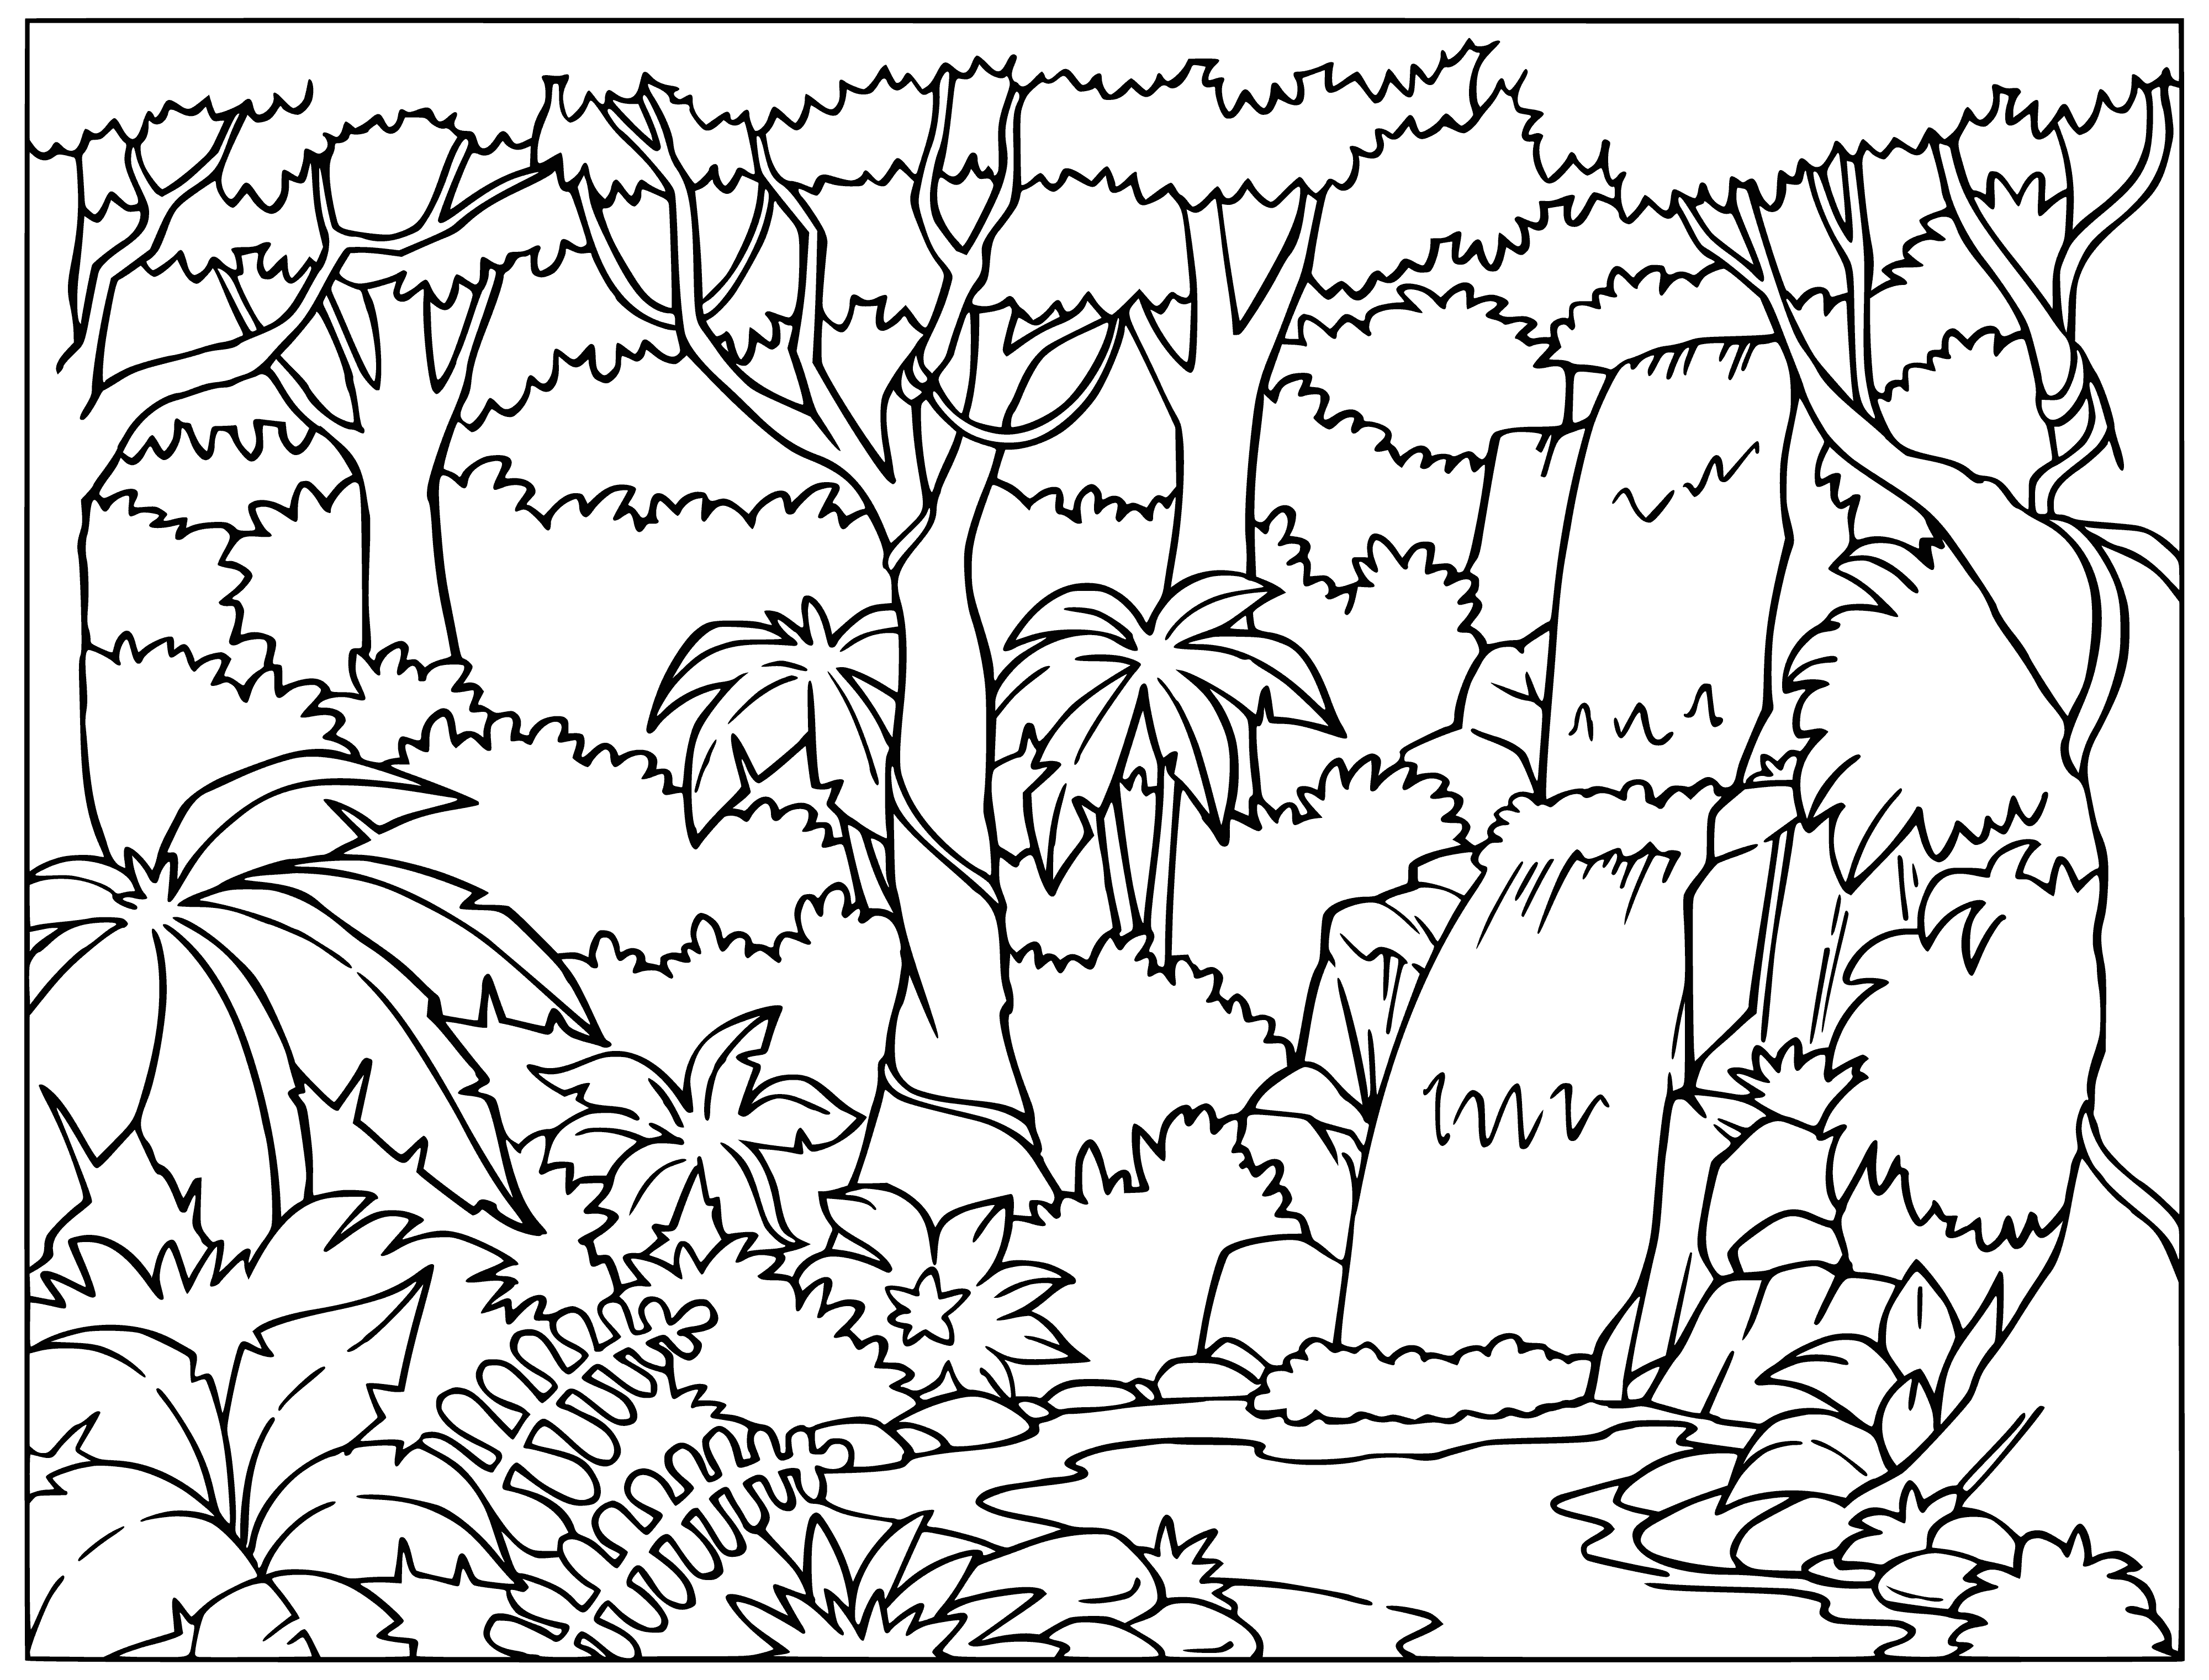 coloring page: Ocean deep blue, sky bright blue, sun huge orange setting, land green, palms & trees, mountains in the distance.